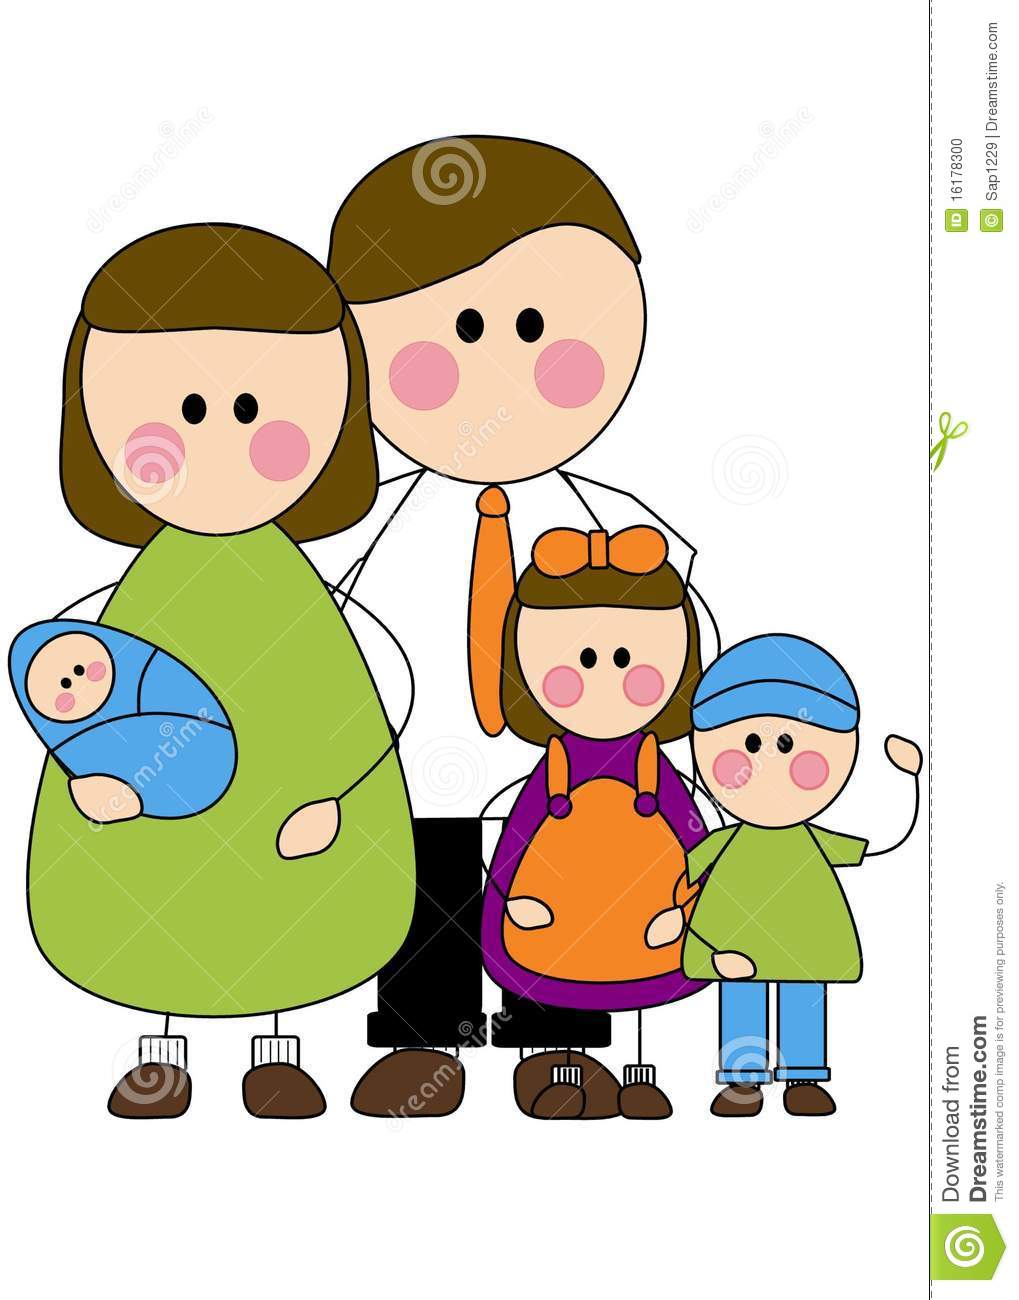 Cartoon Drawing Of A Family Of Five People 